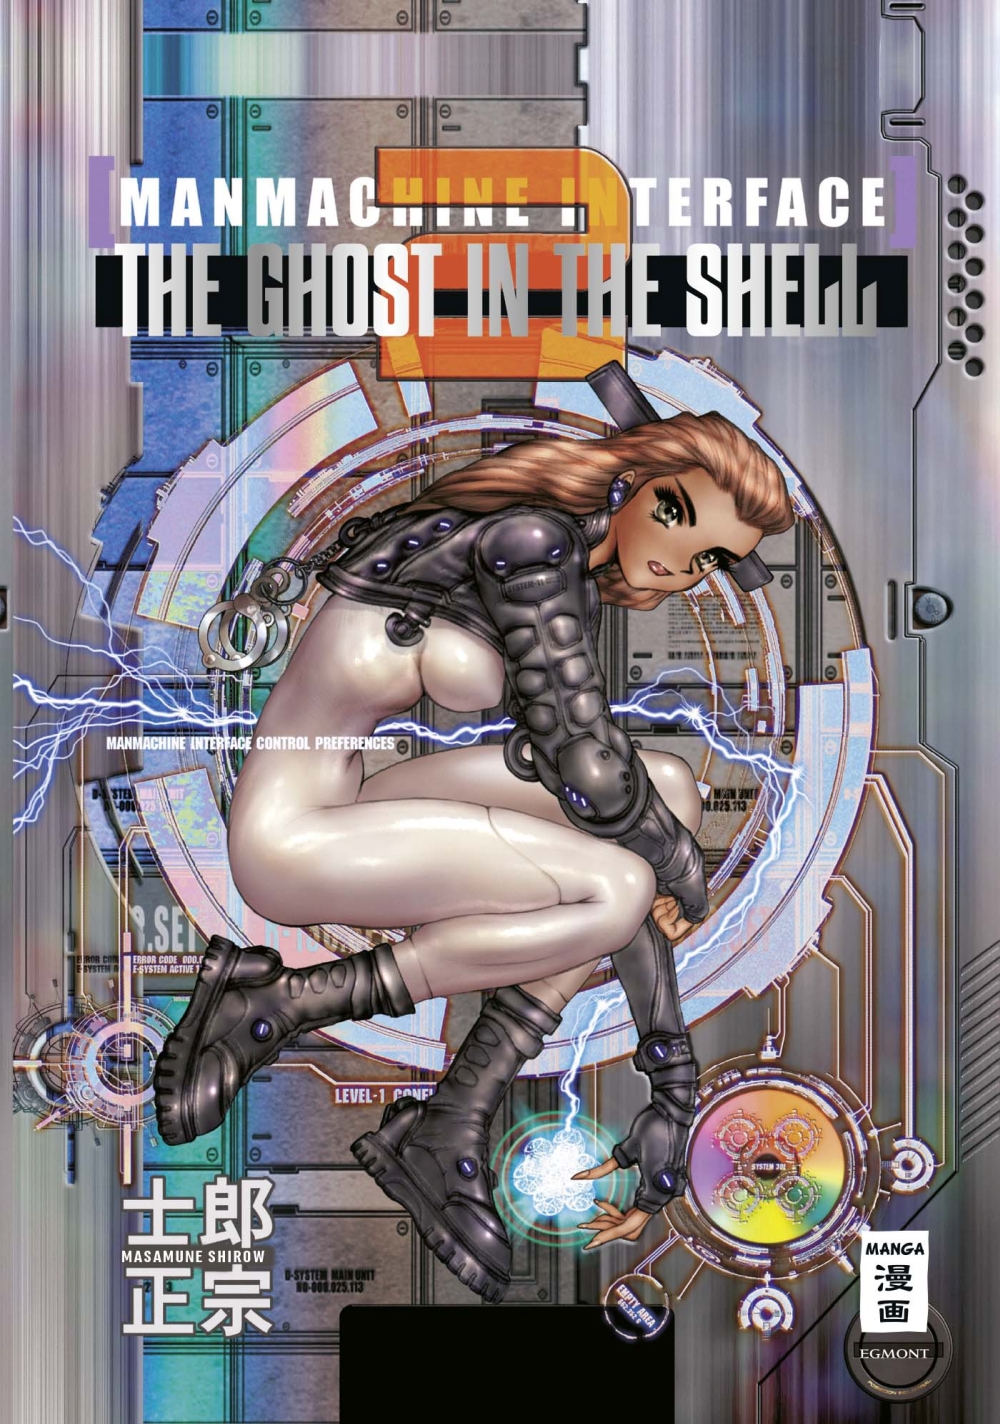 The Ghost in the Shell 2 - Manmachine Interface Manga (New)